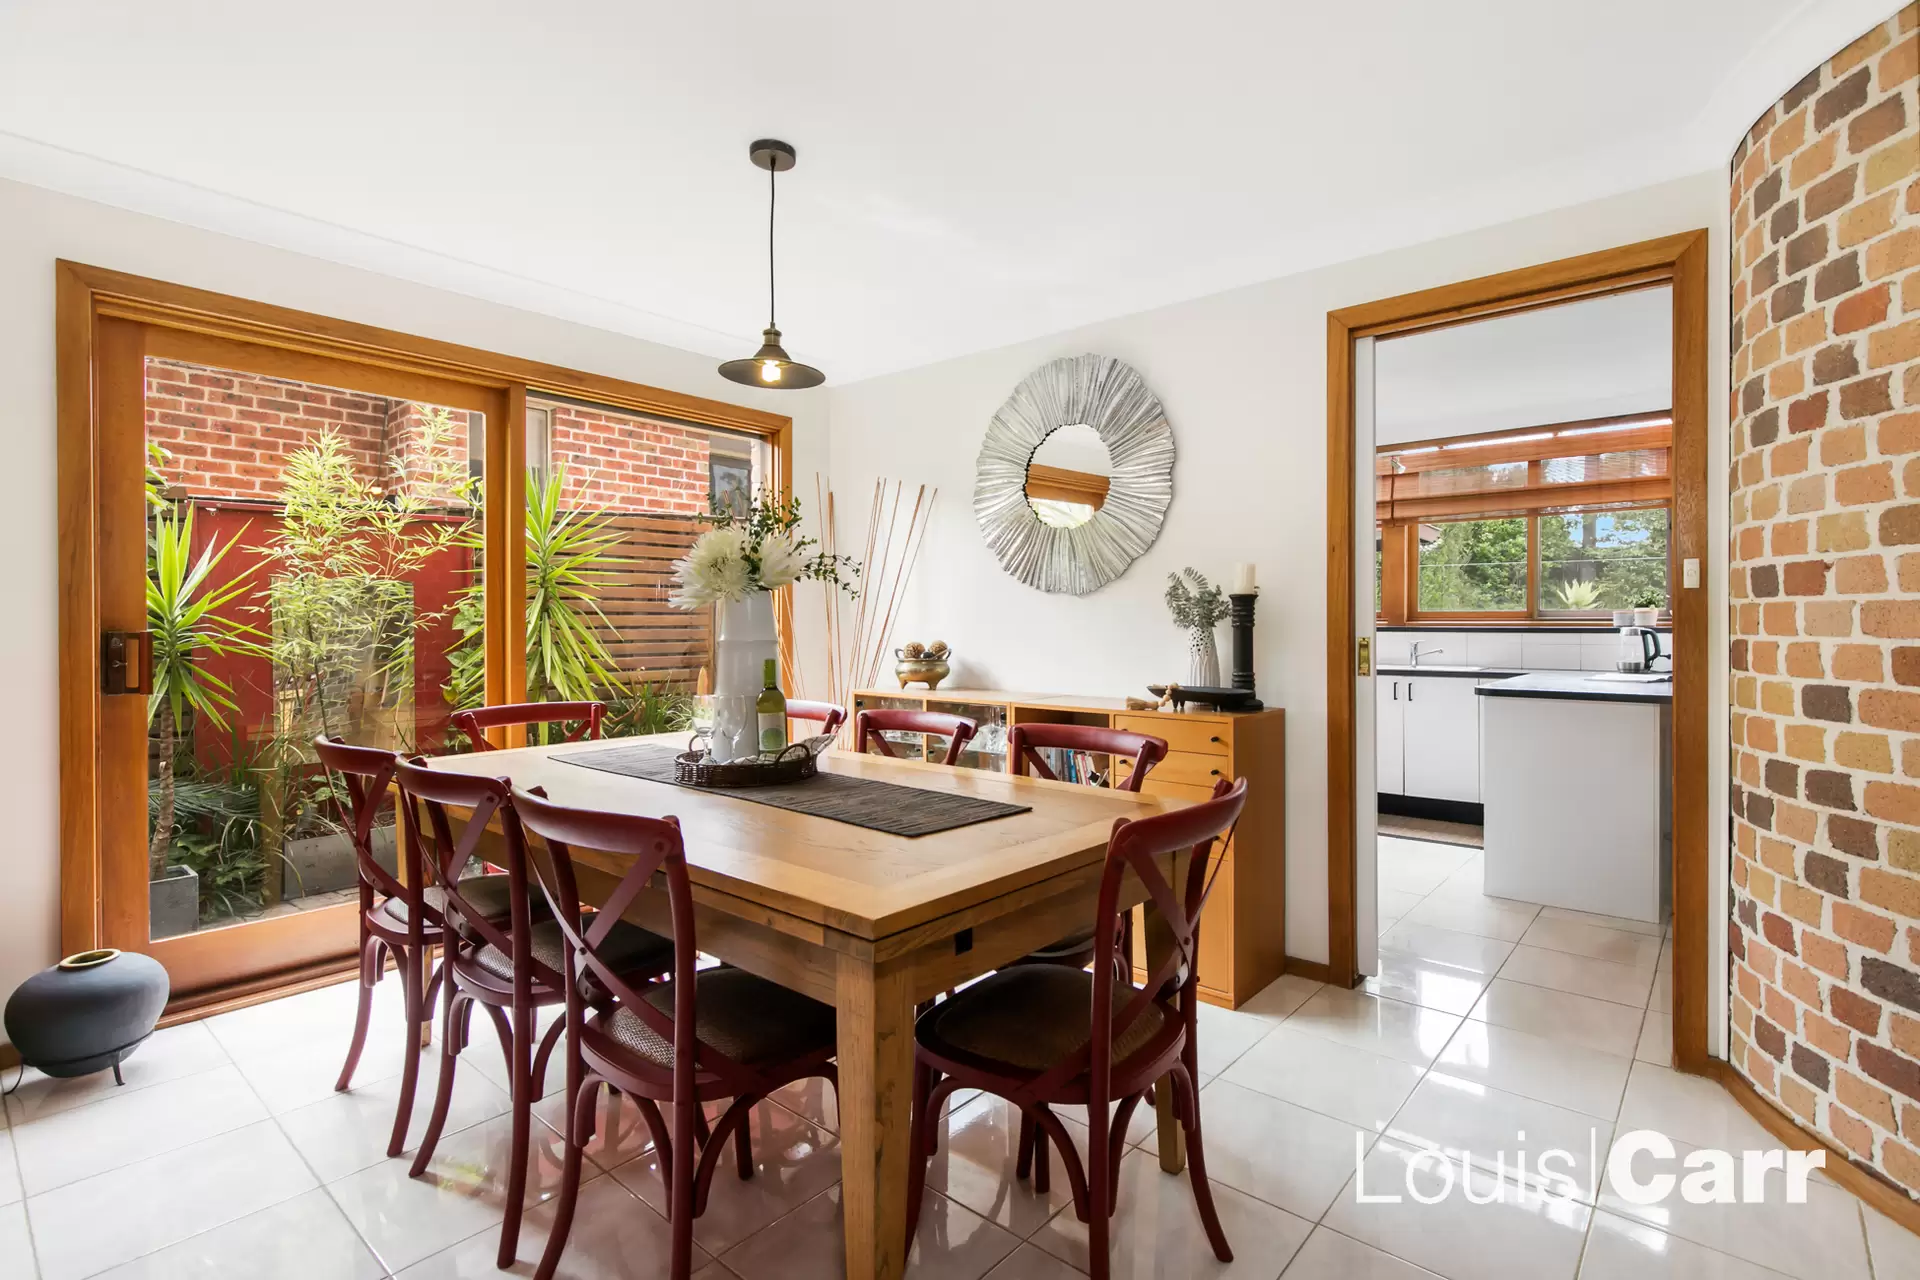 18 Trevors Lane, Cherrybrook For Sale by Louis Carr Real Estate - image 3